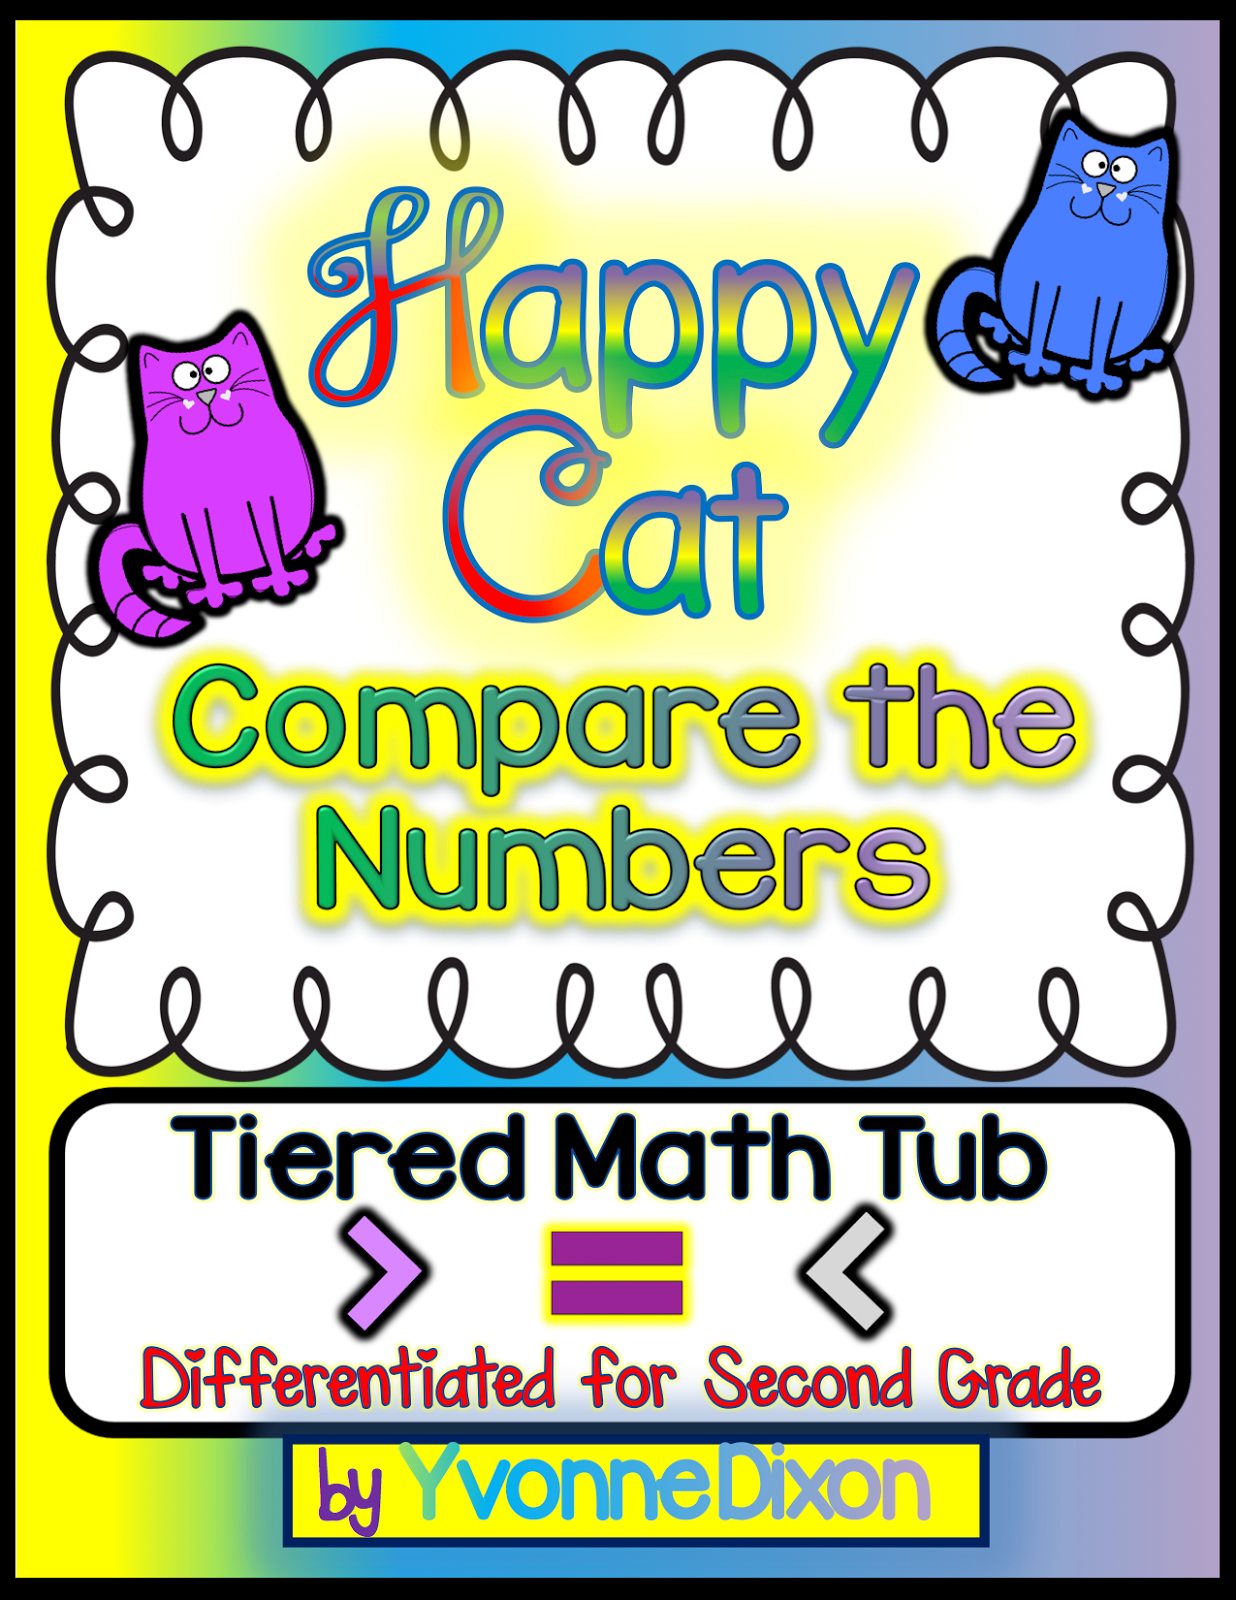 NEW!  By request...MORE MATH TUBS!